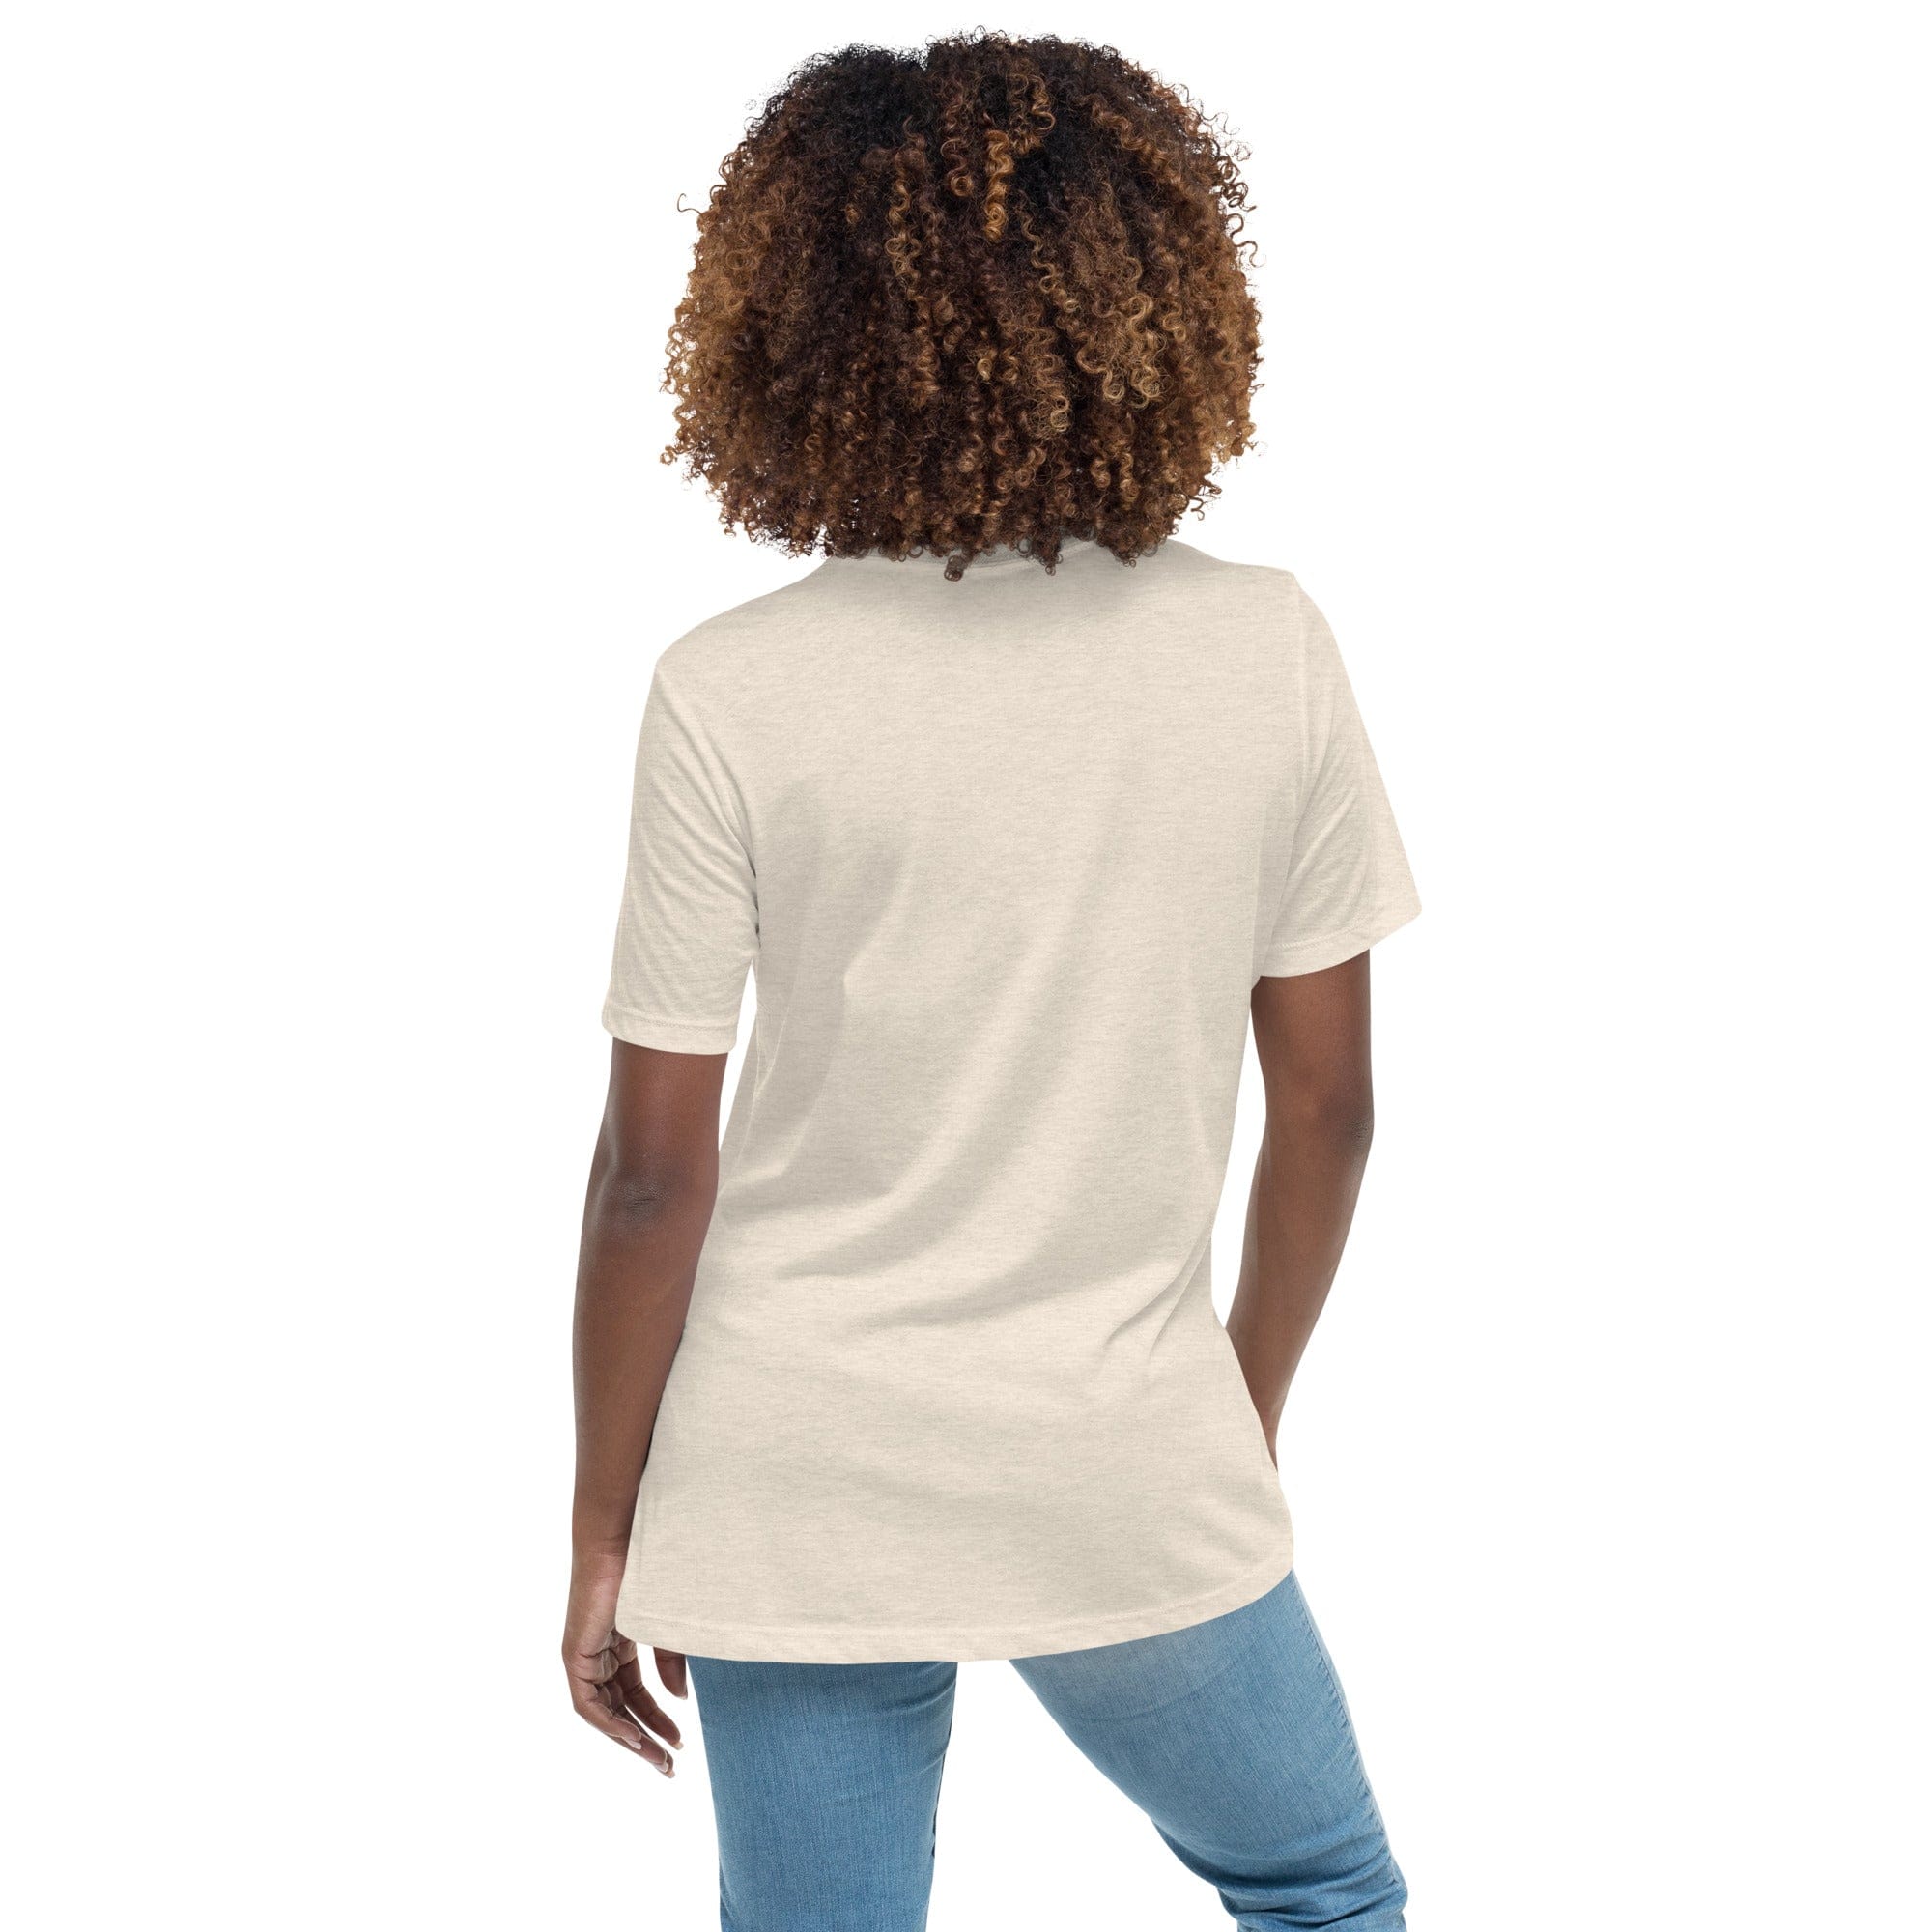 Spruced Roost Gardner Lady - Women's Relaxed T-Shirt - S-3XL